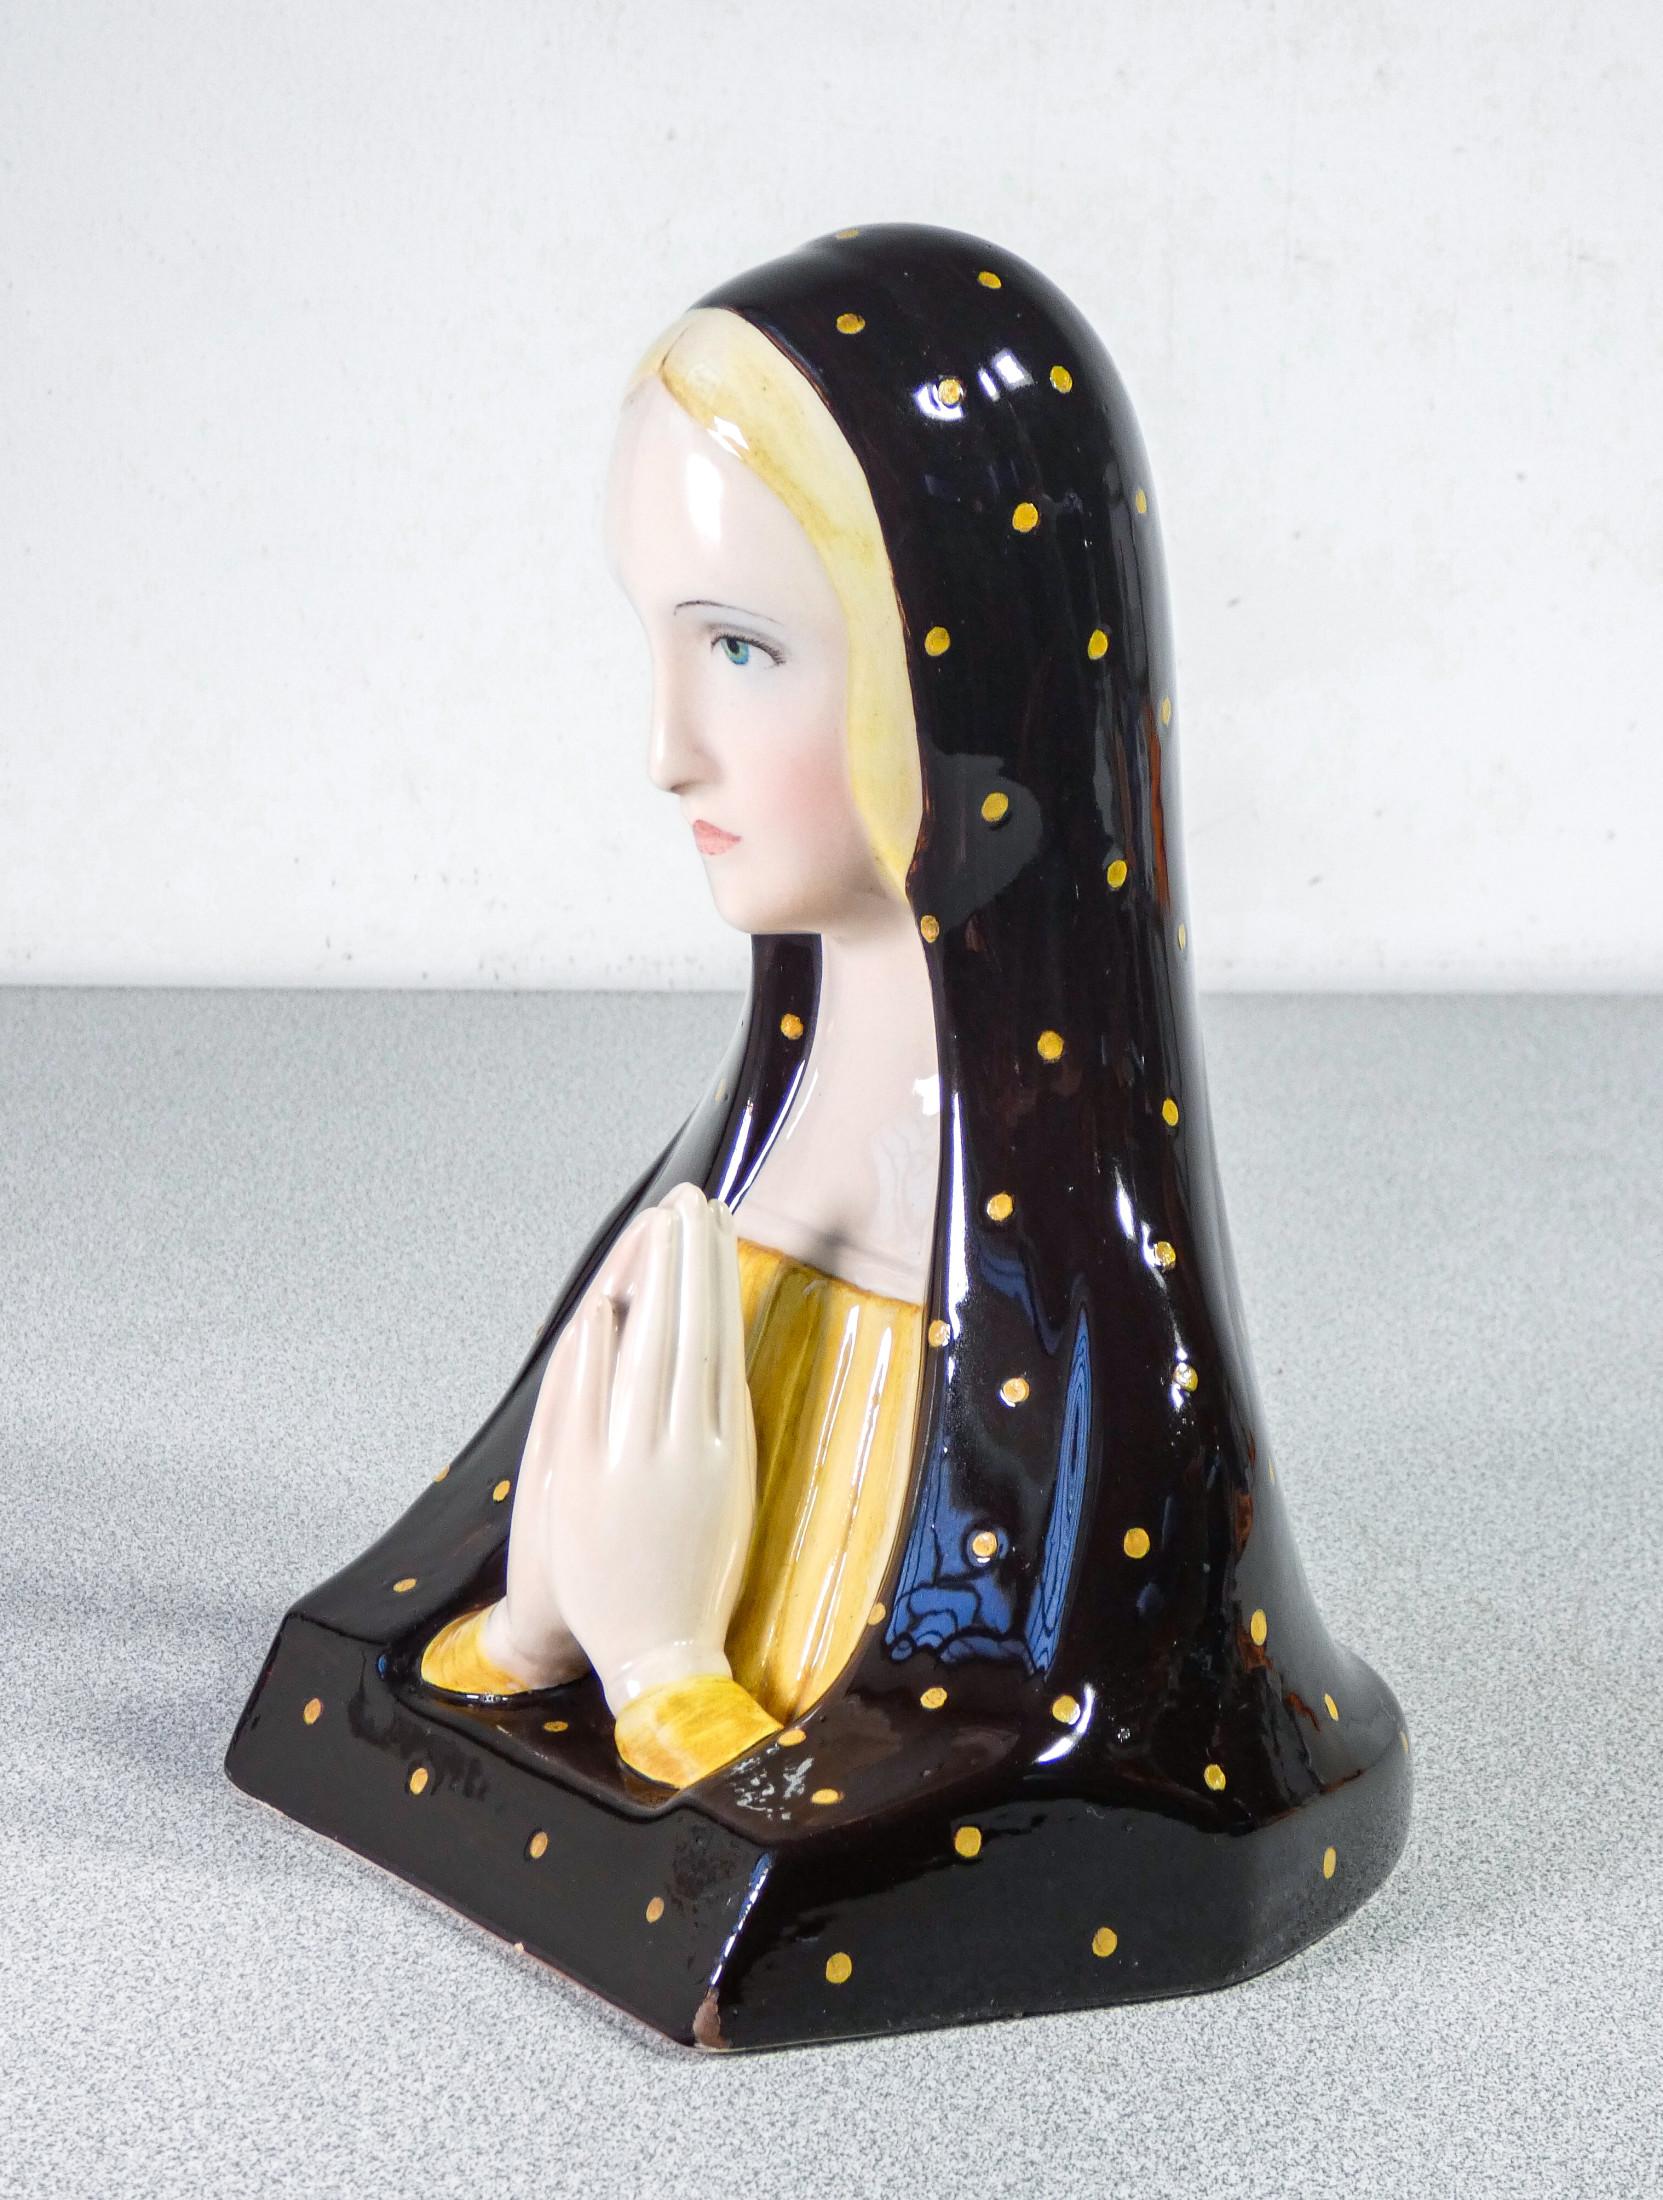 Mid-20th Century Ceramic Sculpture by Paola Bologna for Lenci, Holy Mary, Turin Italy, 1930s